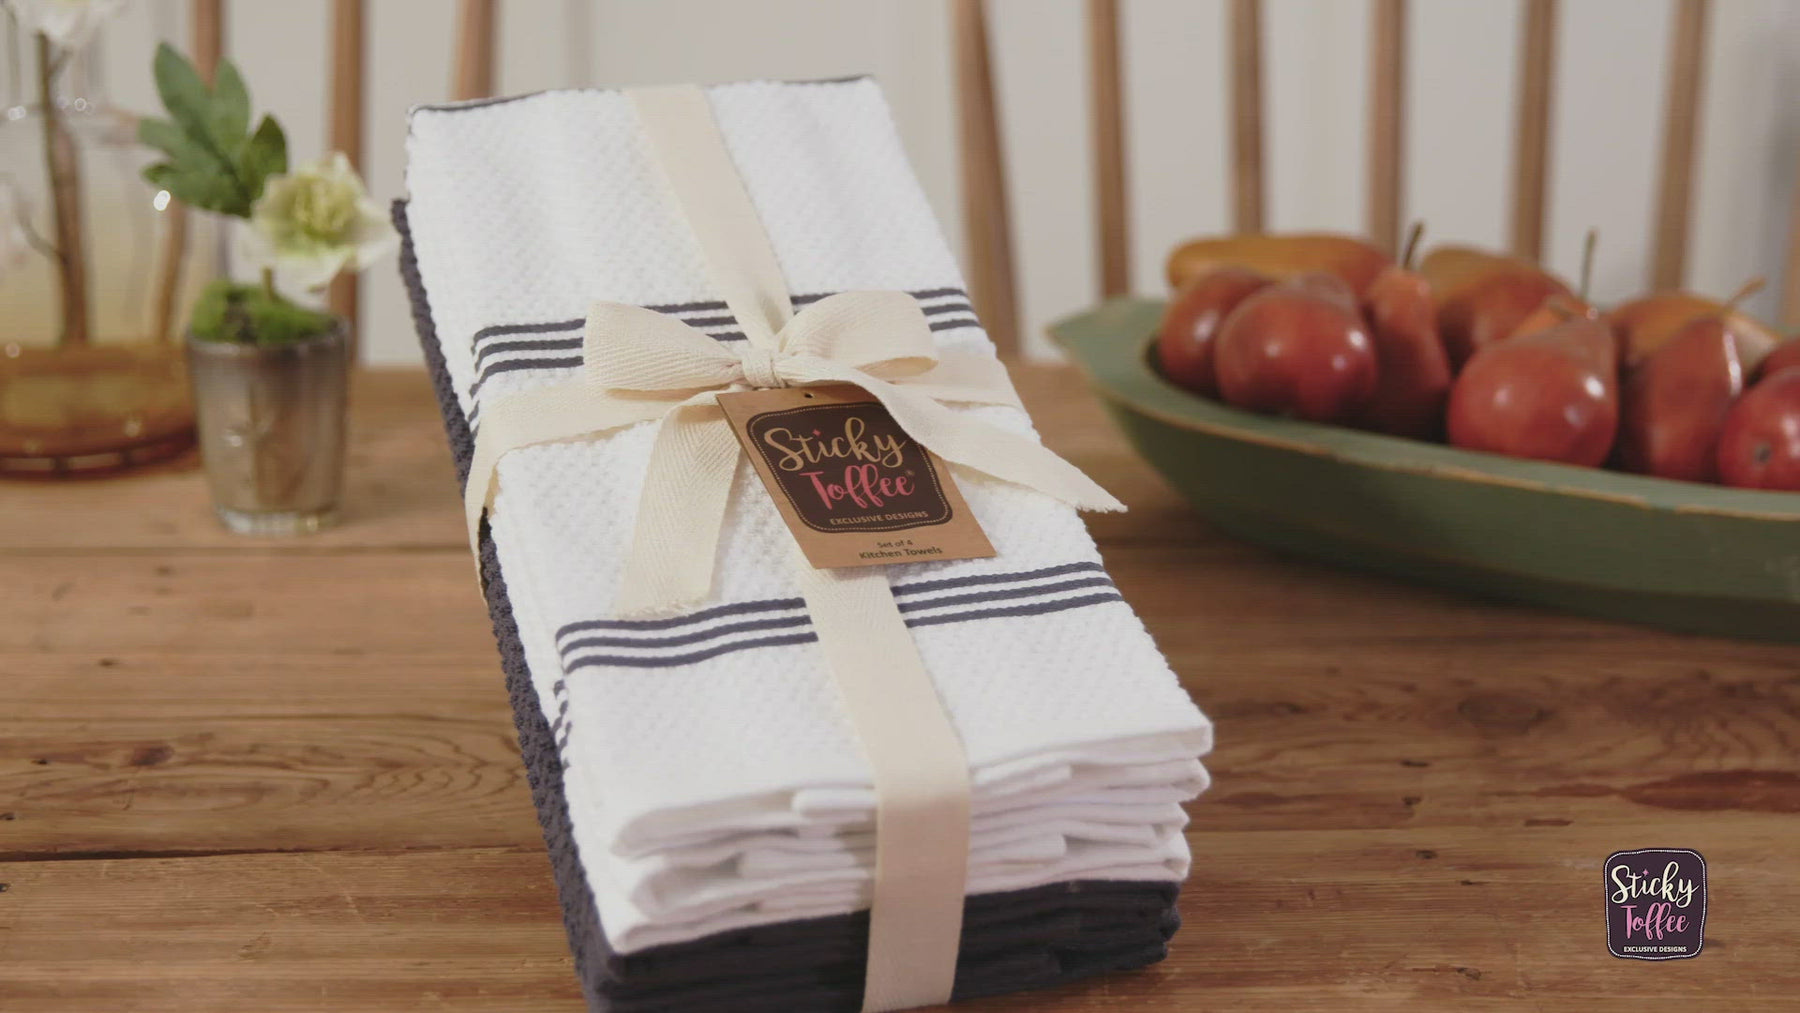 Sticky Toffee Cotton Terry White Kitchen Dish Towel, 4 Pack, 28 x 16 – Sticky  Toffee Textiles